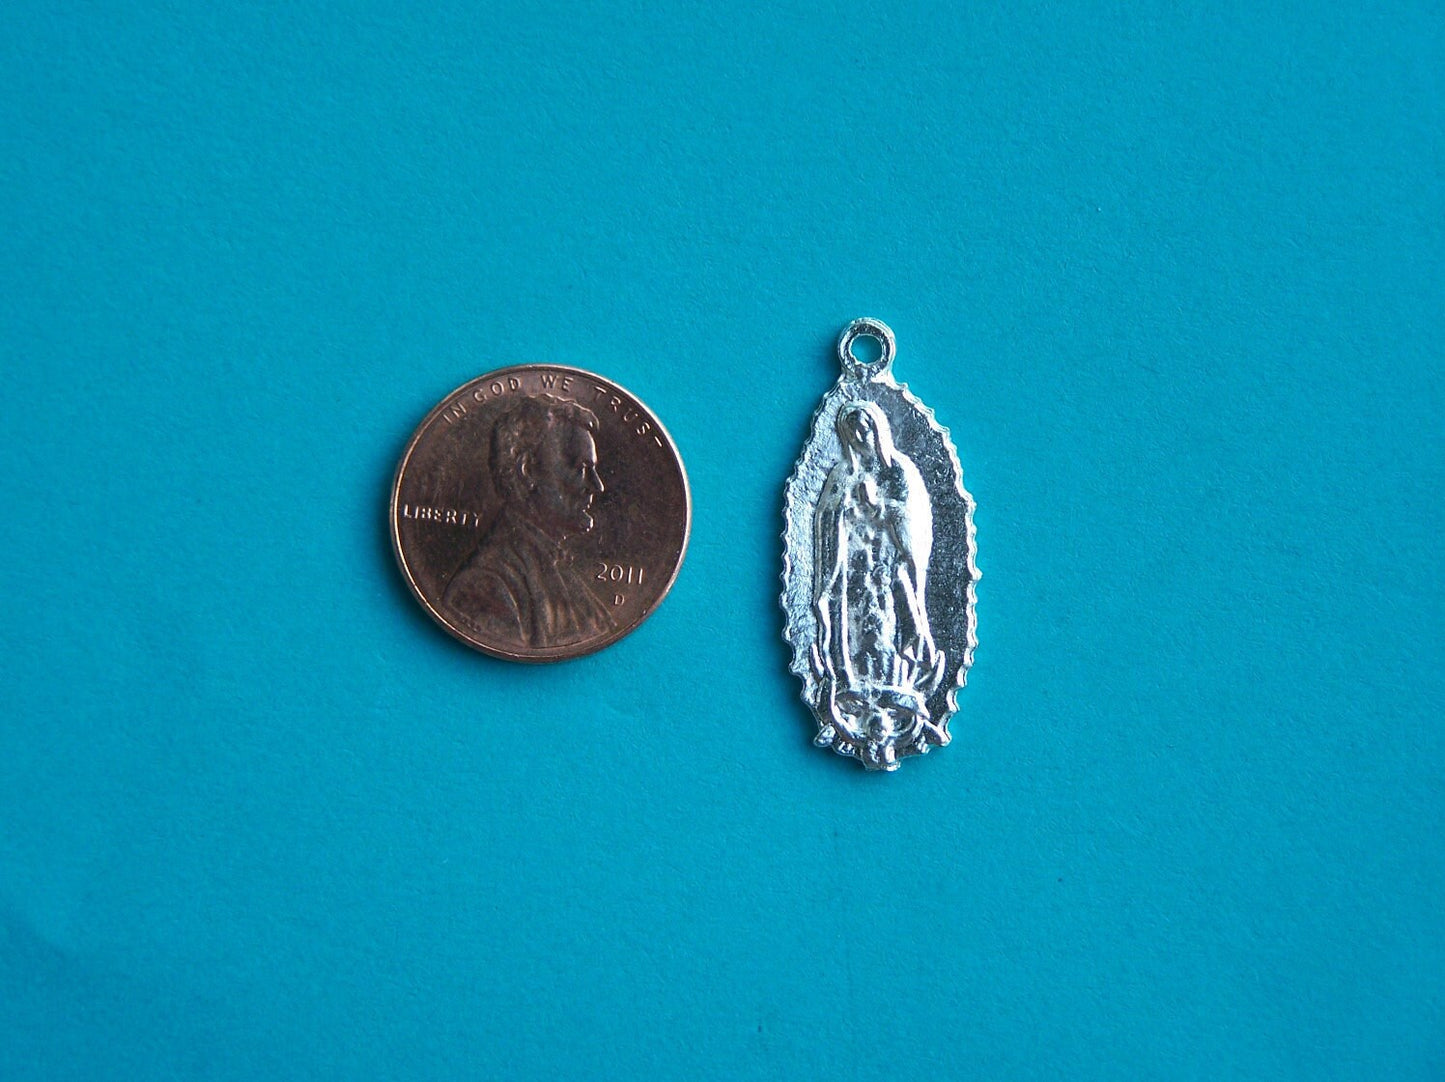 Milagro Lot - Lot of 50 Standard Virgin of Guadalupe Milagros - Mexico